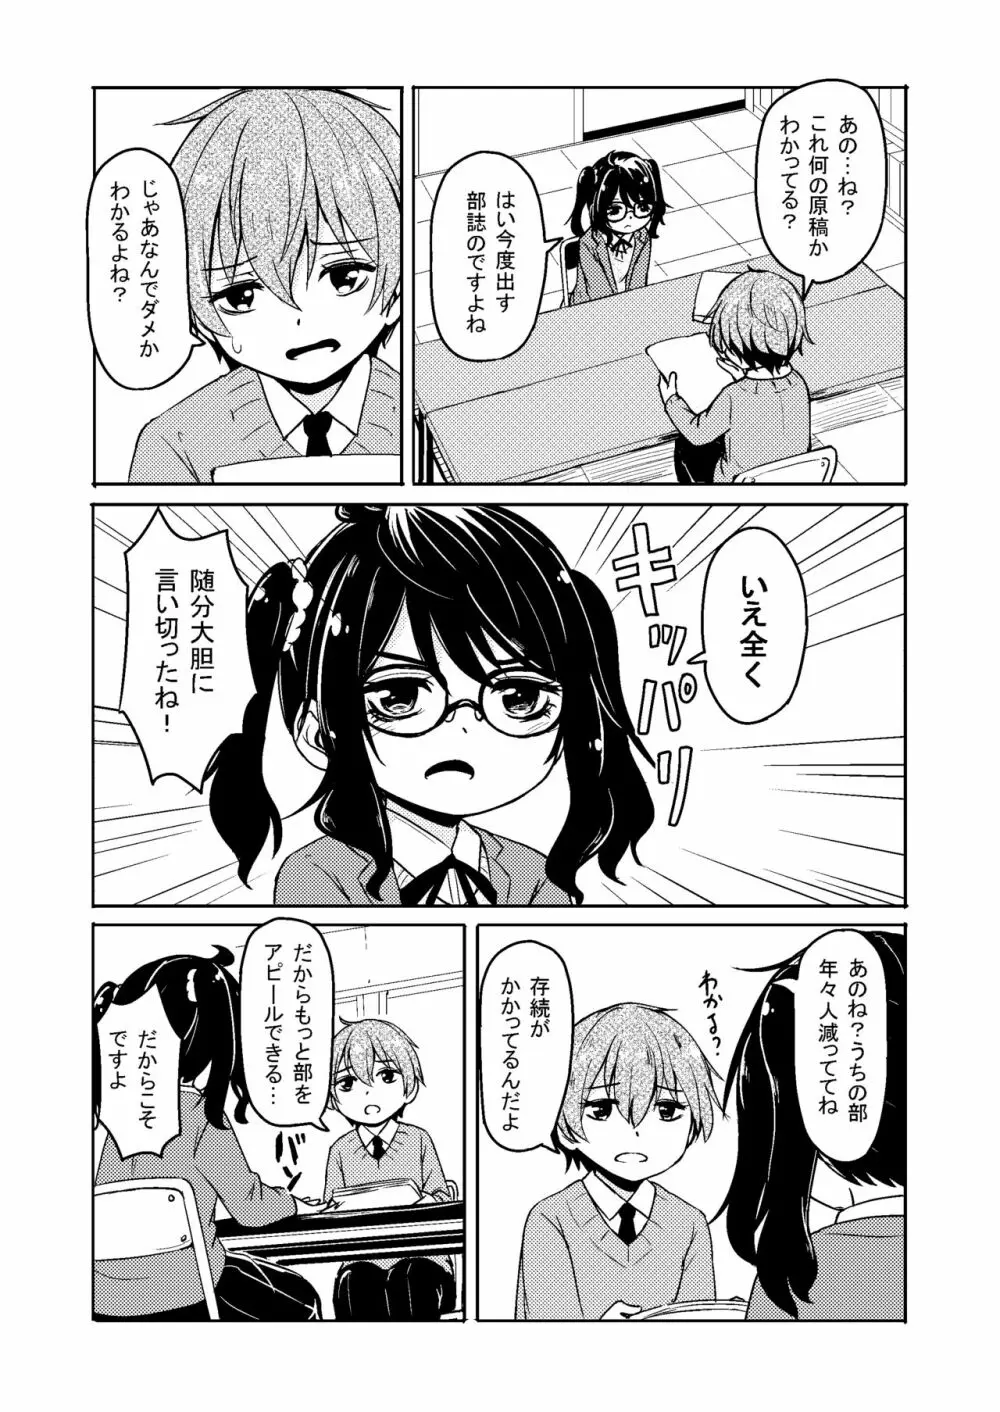 Don't scare Be born + ボツったマンガです。 - page30